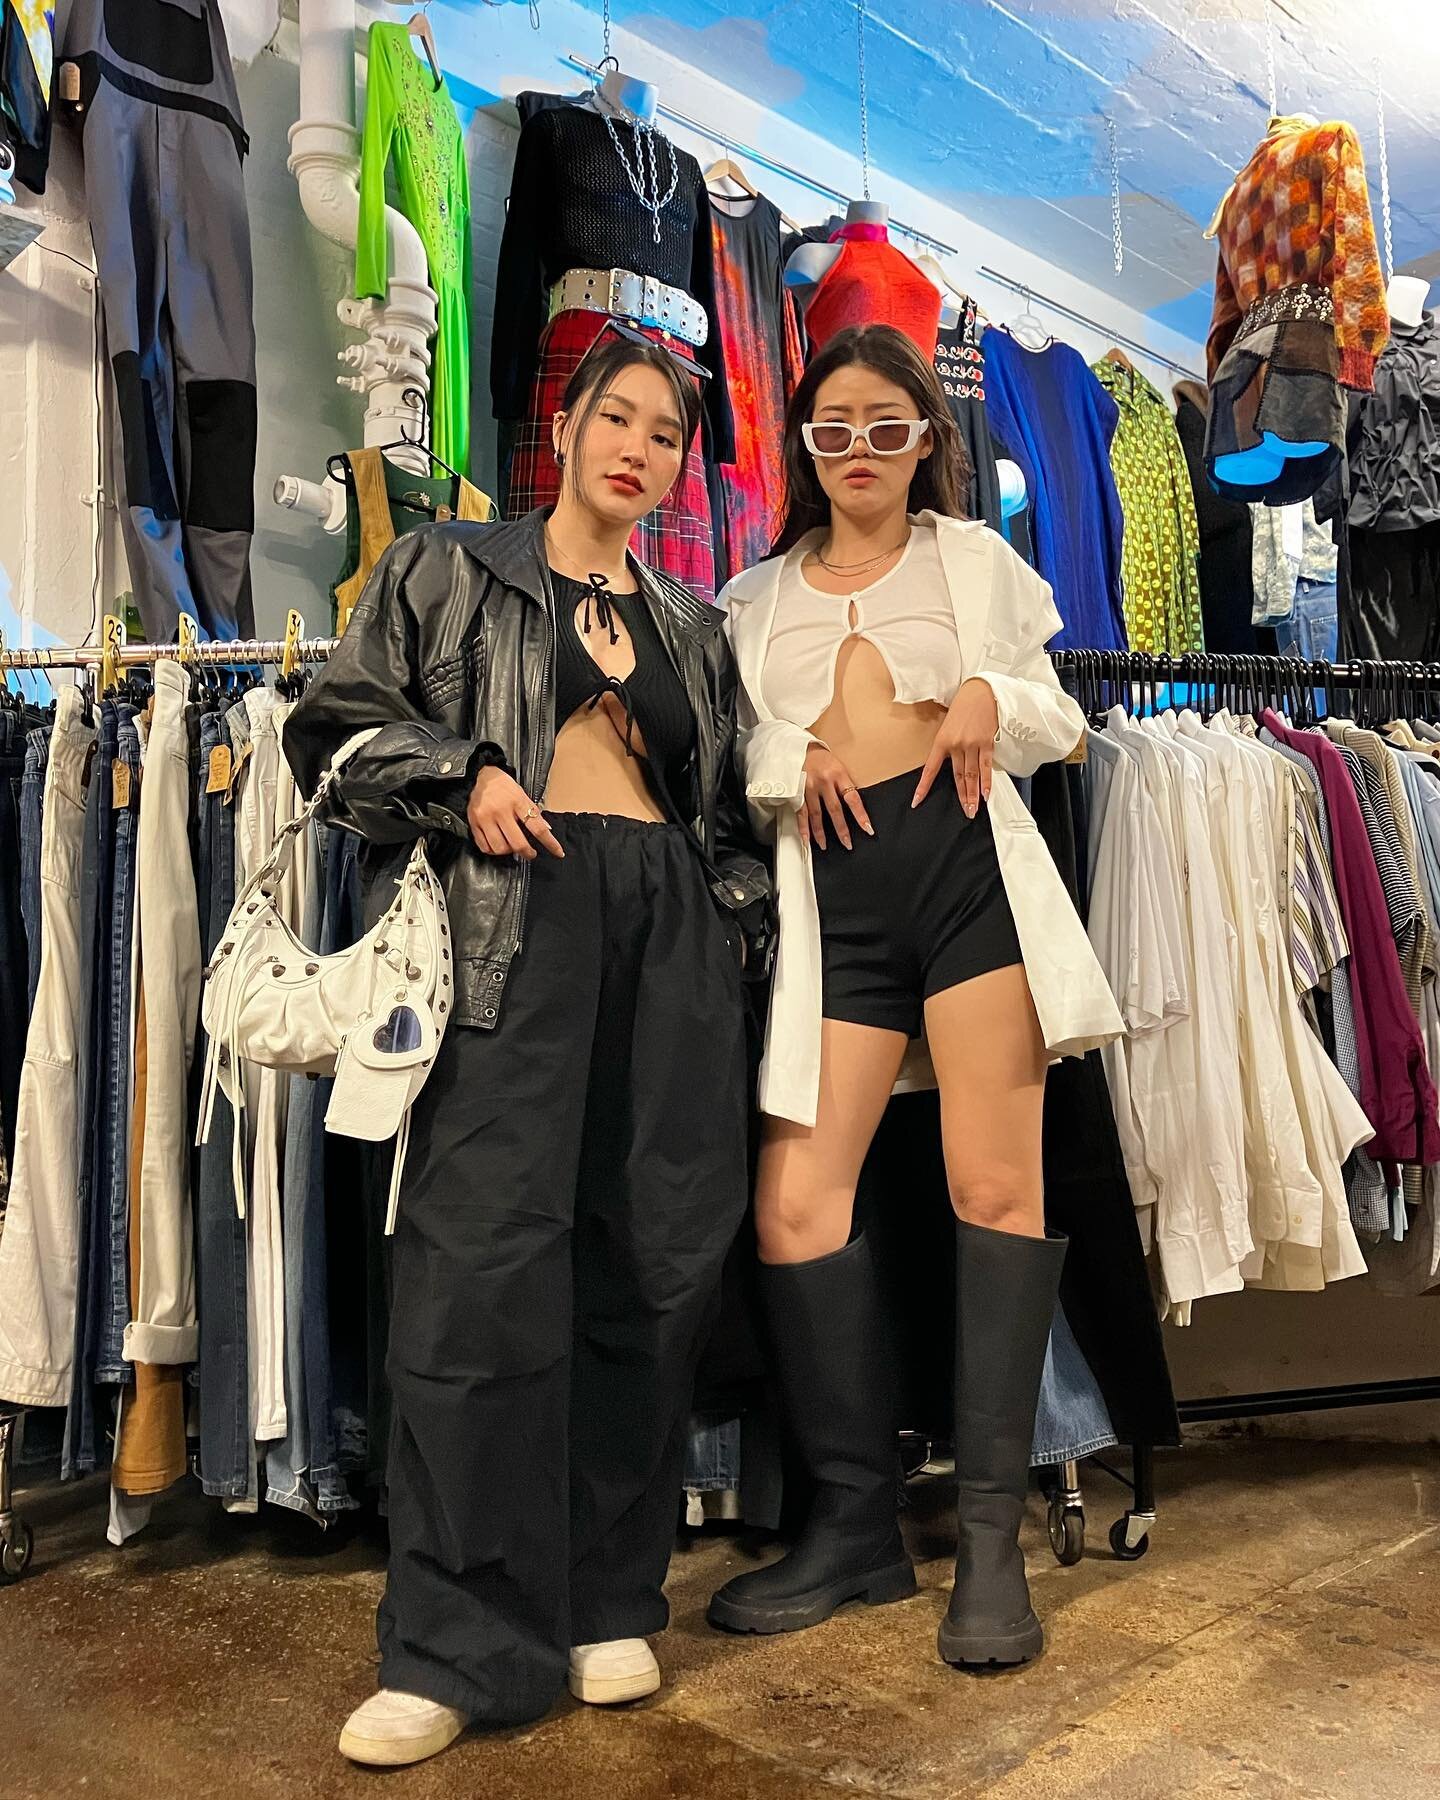 Our stylish customers came to visit us at Vintage Planet 🖤🖤

#vintageplanet #bricklane #vintageshop #bricklanevintagemarket #90s #80s #photoshoot #streetstyle #fashion